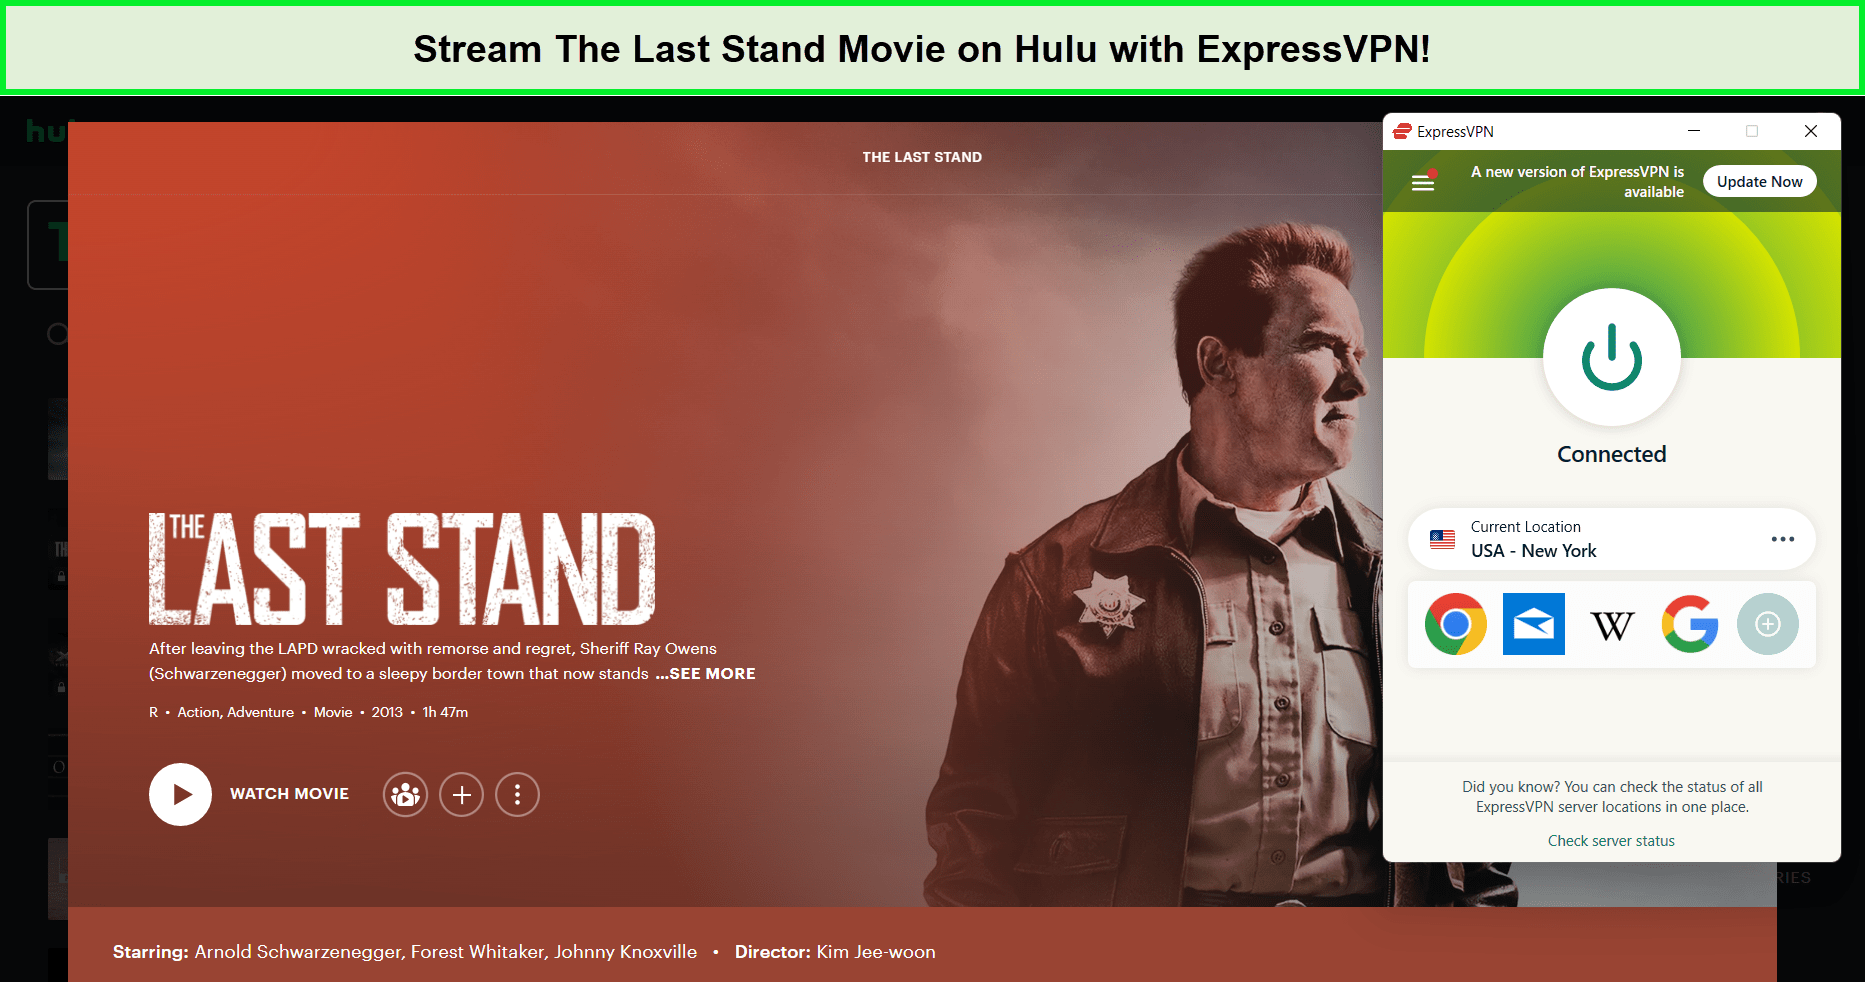 With-ExpressVPN-Watch-The-Last-Stand-Movie-on-Hulu-in-UAE